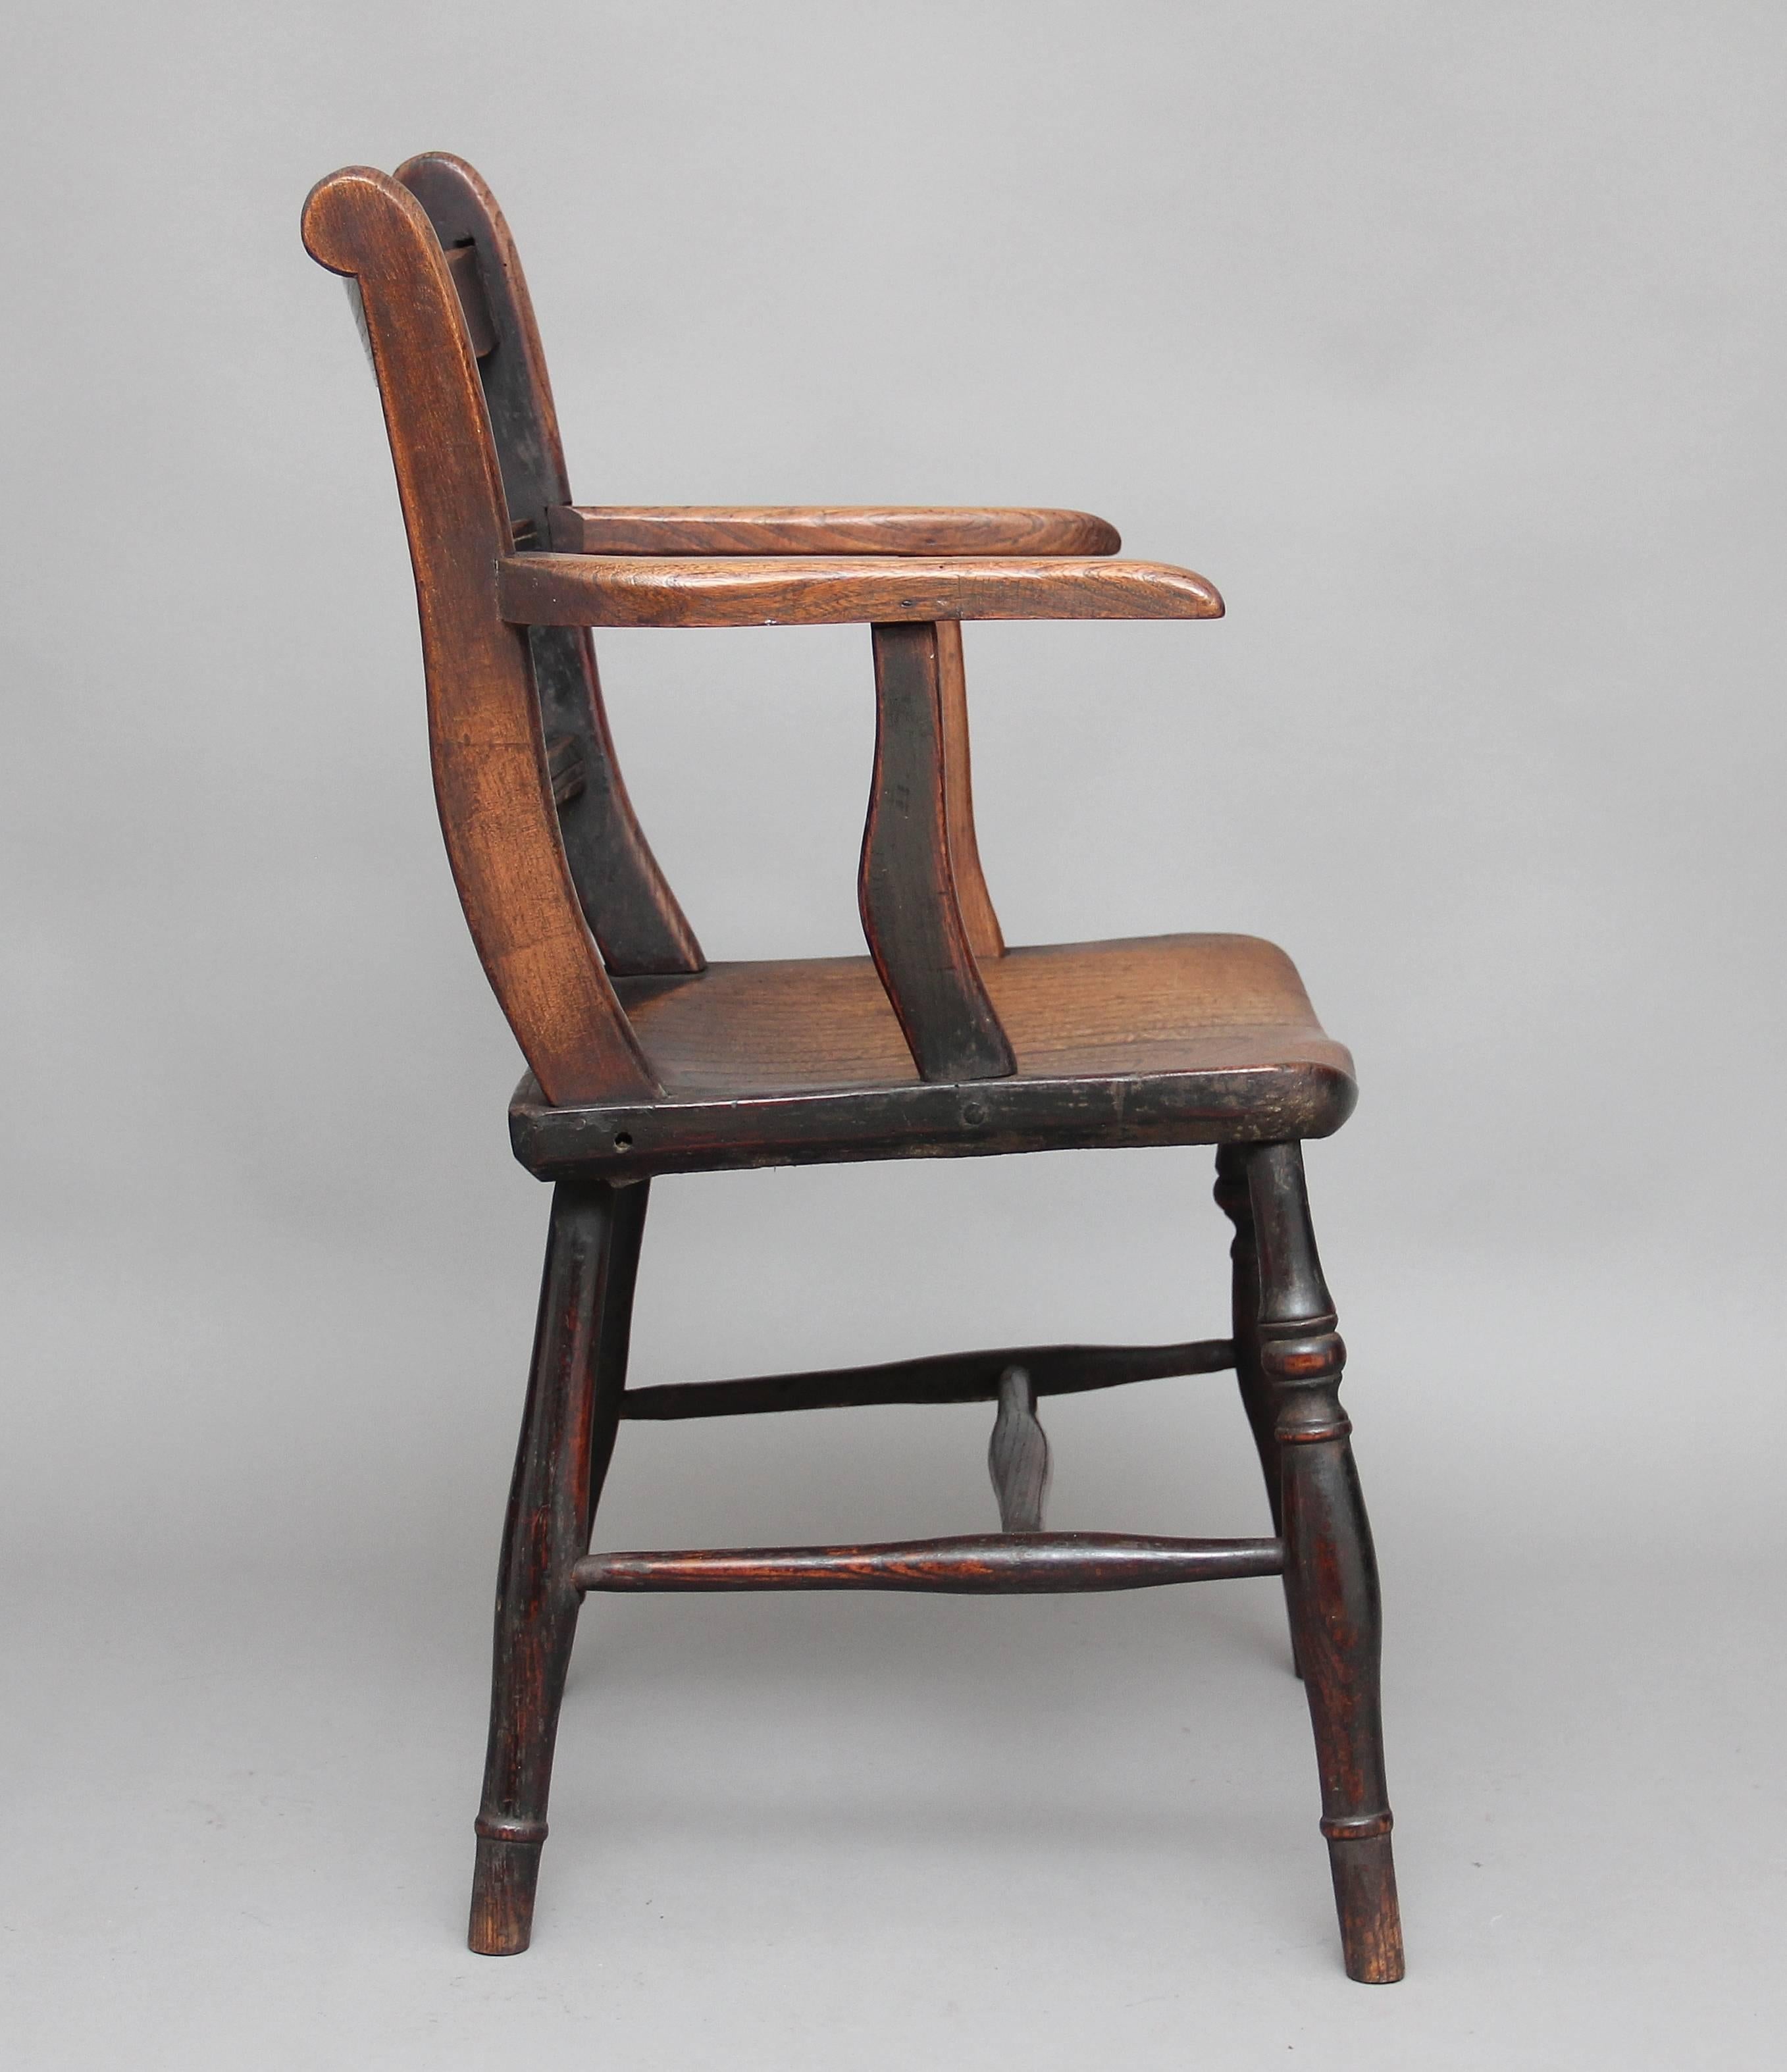 19th century elm and ash armchair, the bar back supported by three small spindles, shaped arm supports, a nice figured saddle seat, standing on turned legs united by an H stretcher. circa 1840.
  